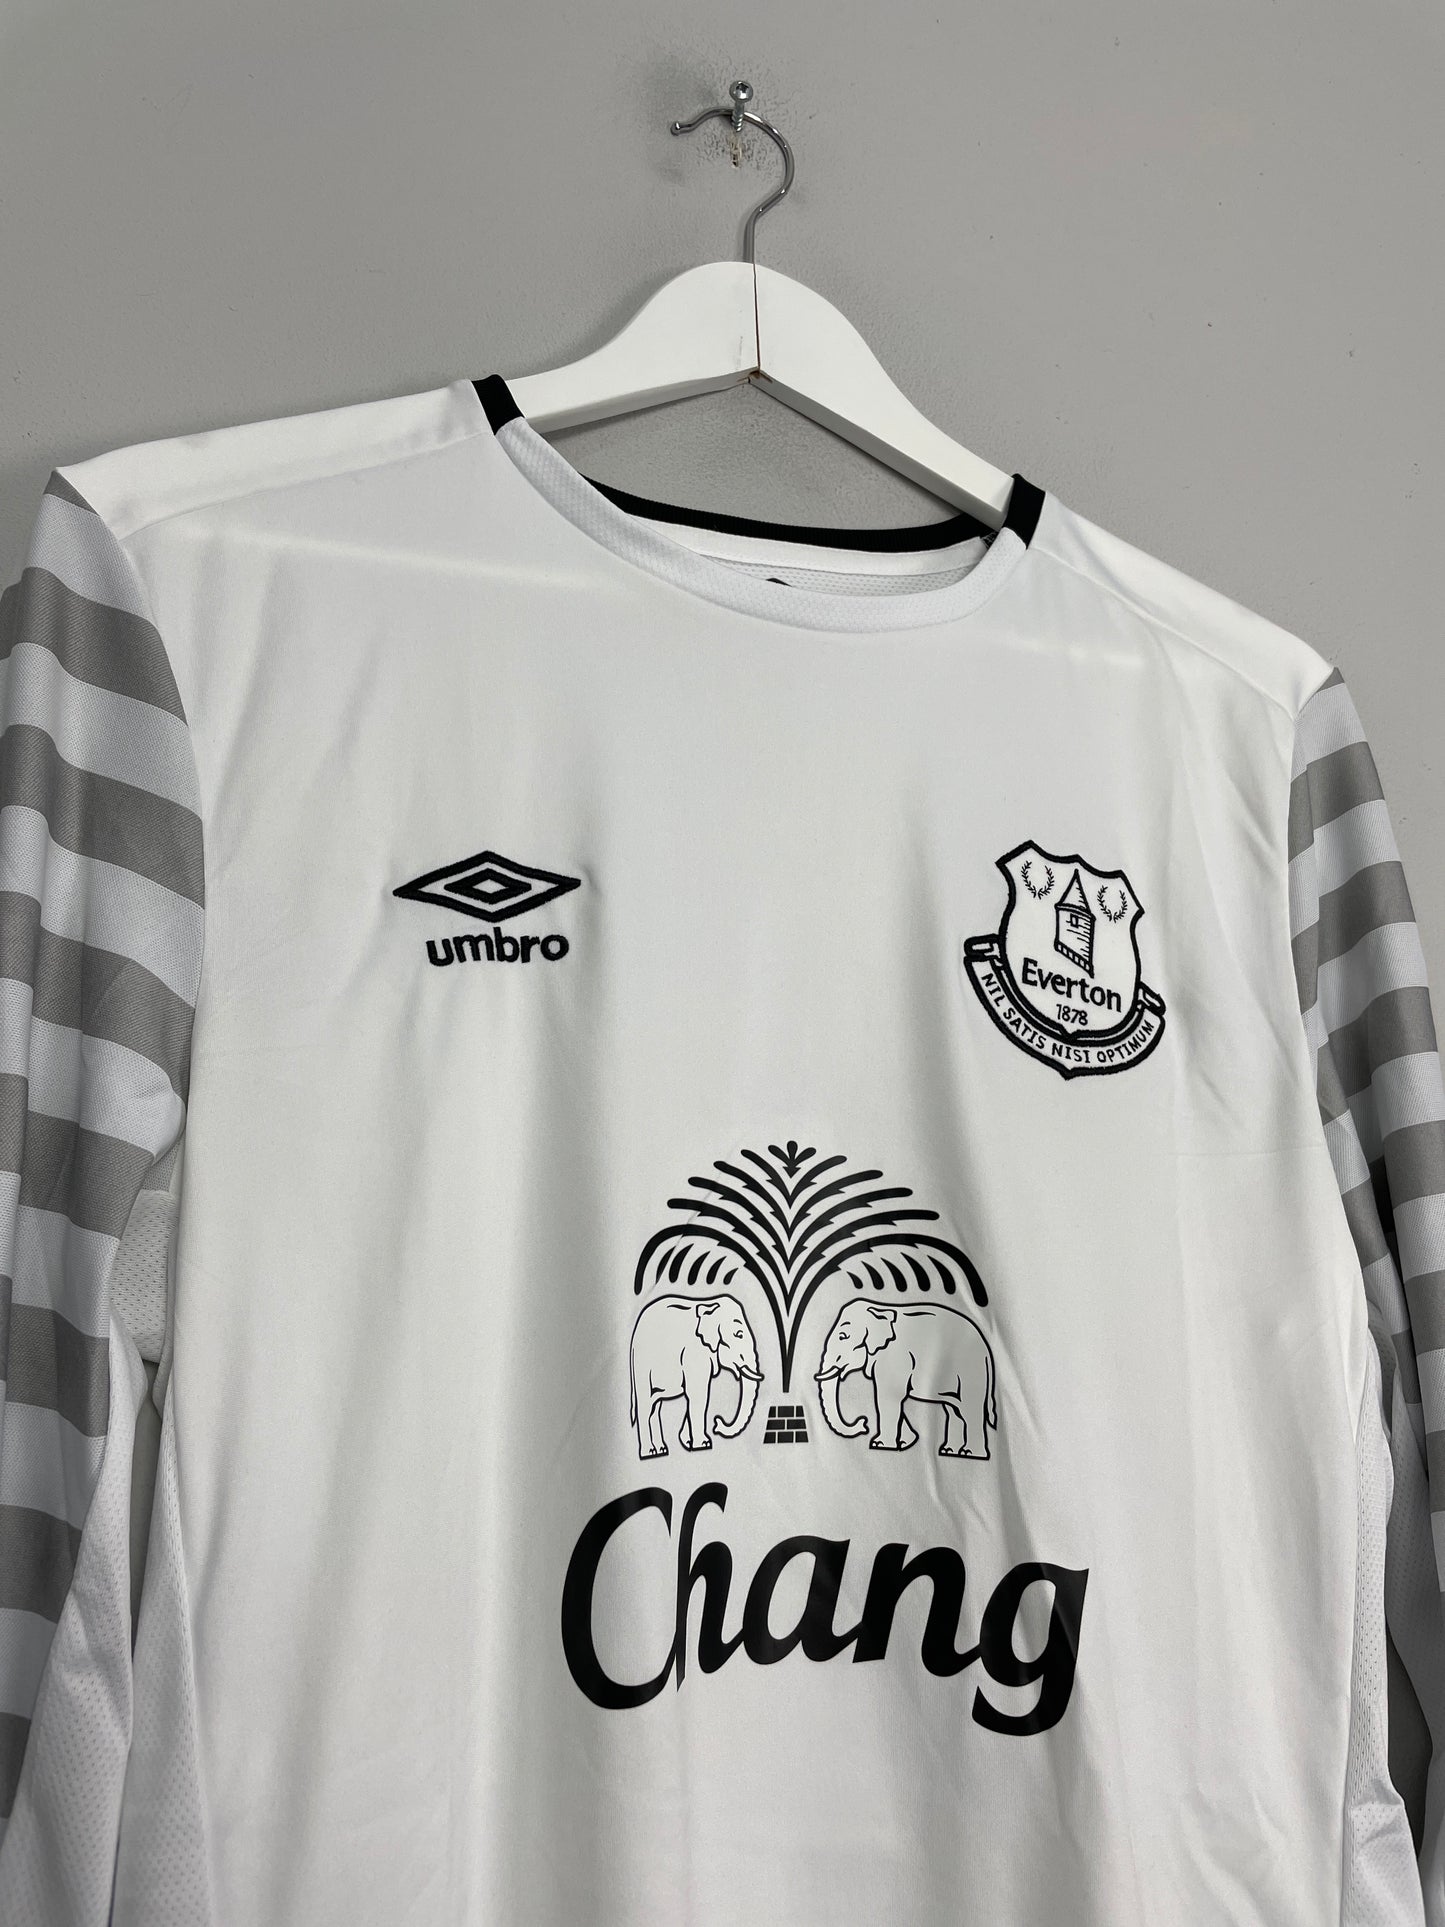 2015/16 EVERTON STONES #5 *MATCH ISSUE + SIGNED* L/S CUP AWAY SHIRT (M) UMBRO